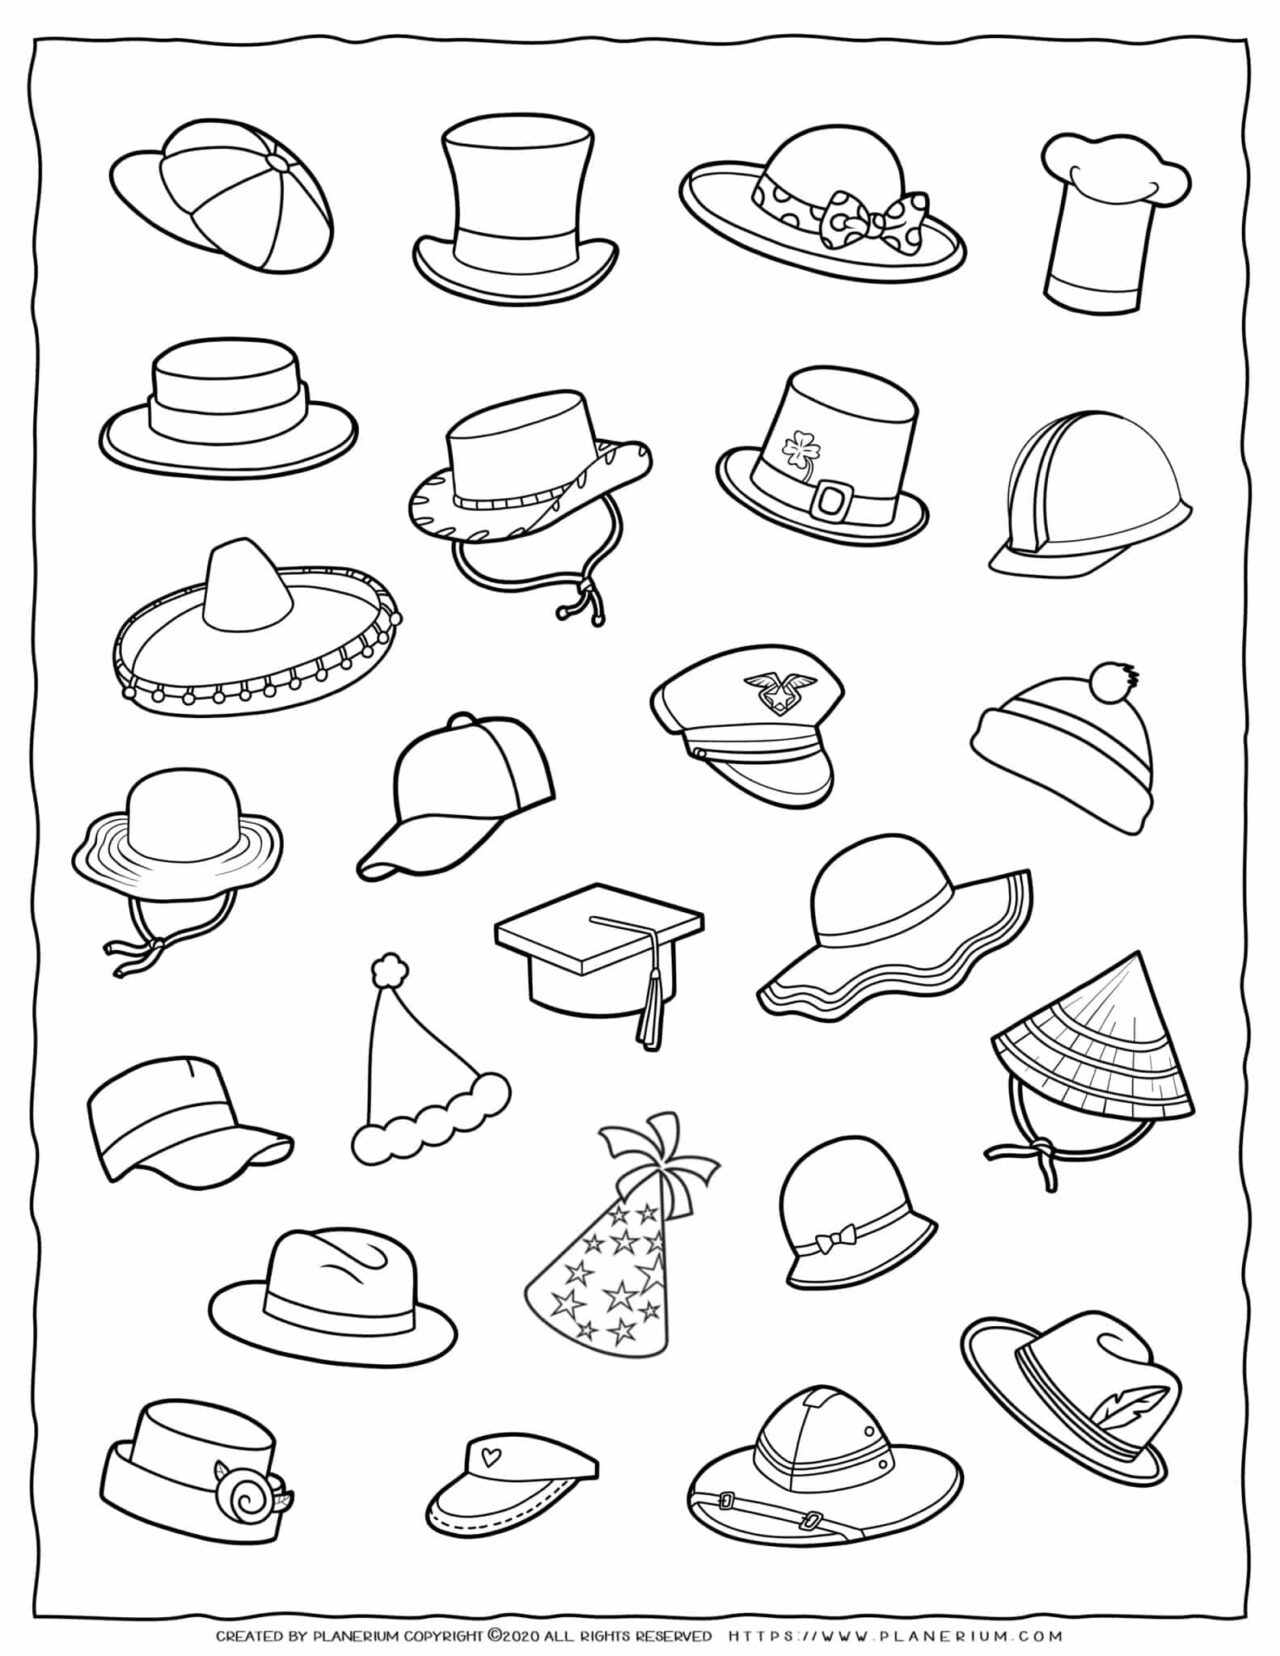 Clothes Coloring Page - Hats Collection | Planerium